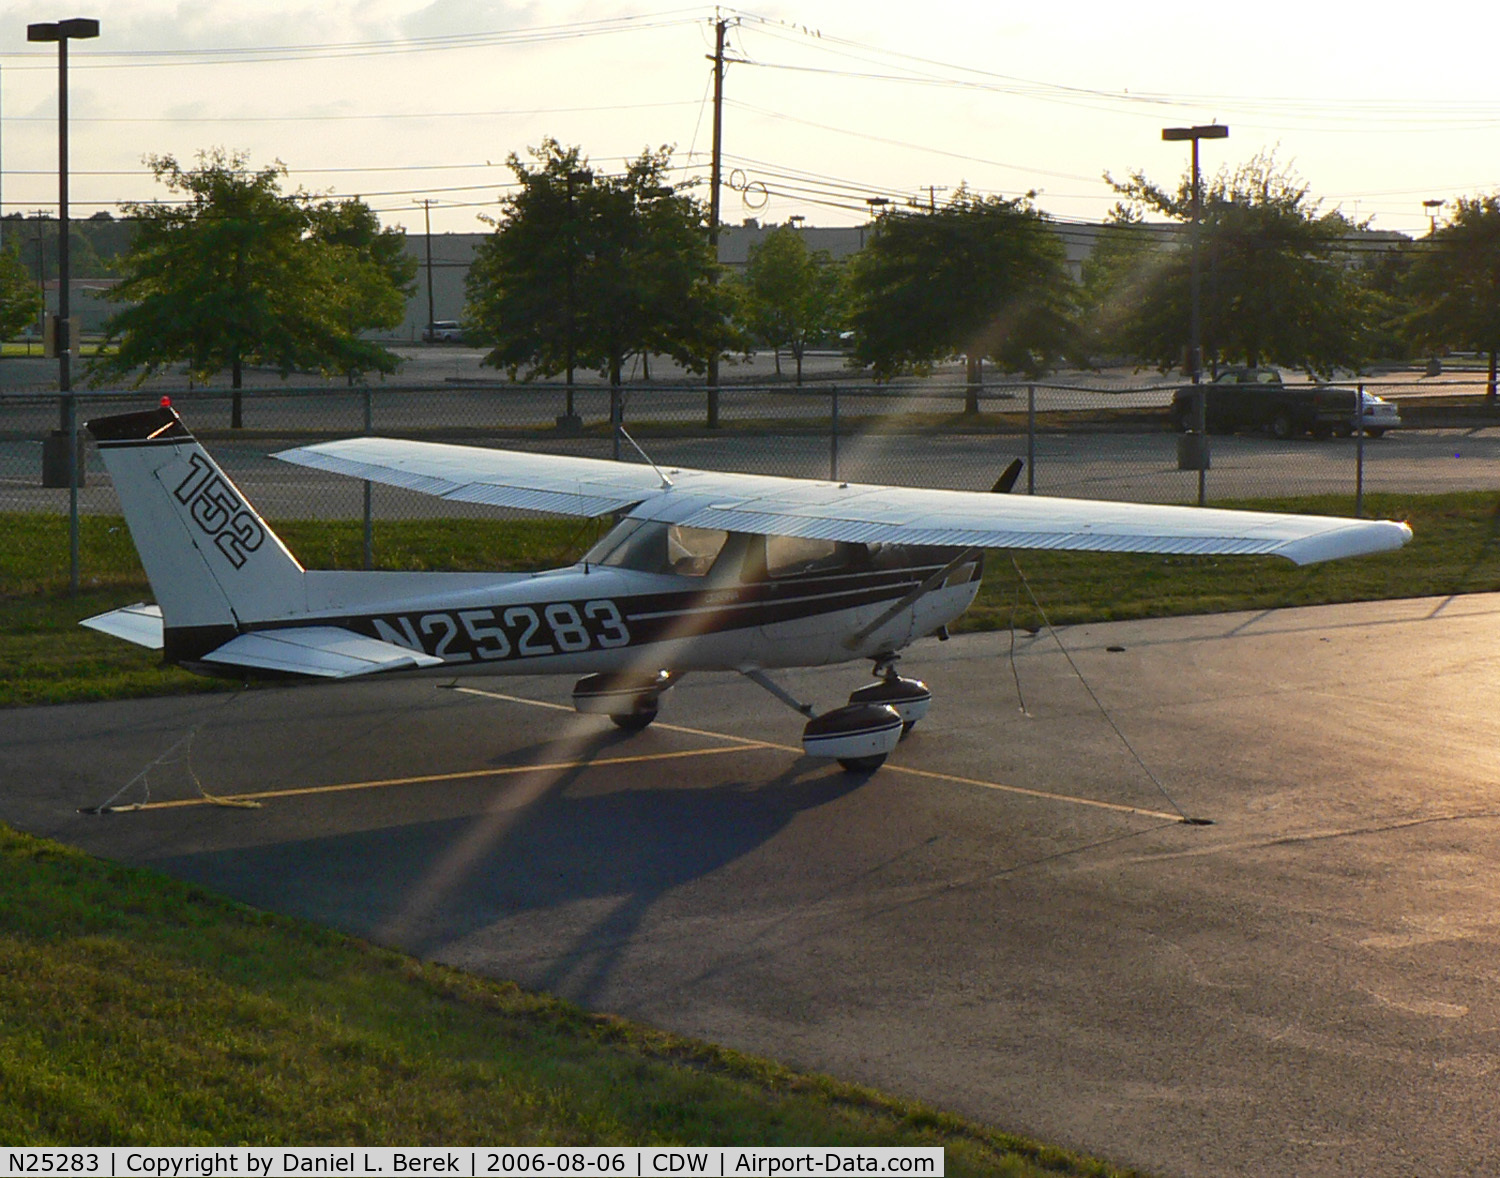 N25283, 1977 Cessna 152 C/N 15280571, Normally based in Vermont ski country, this Cessna 152 enjoys a summer evening in New Jersey.